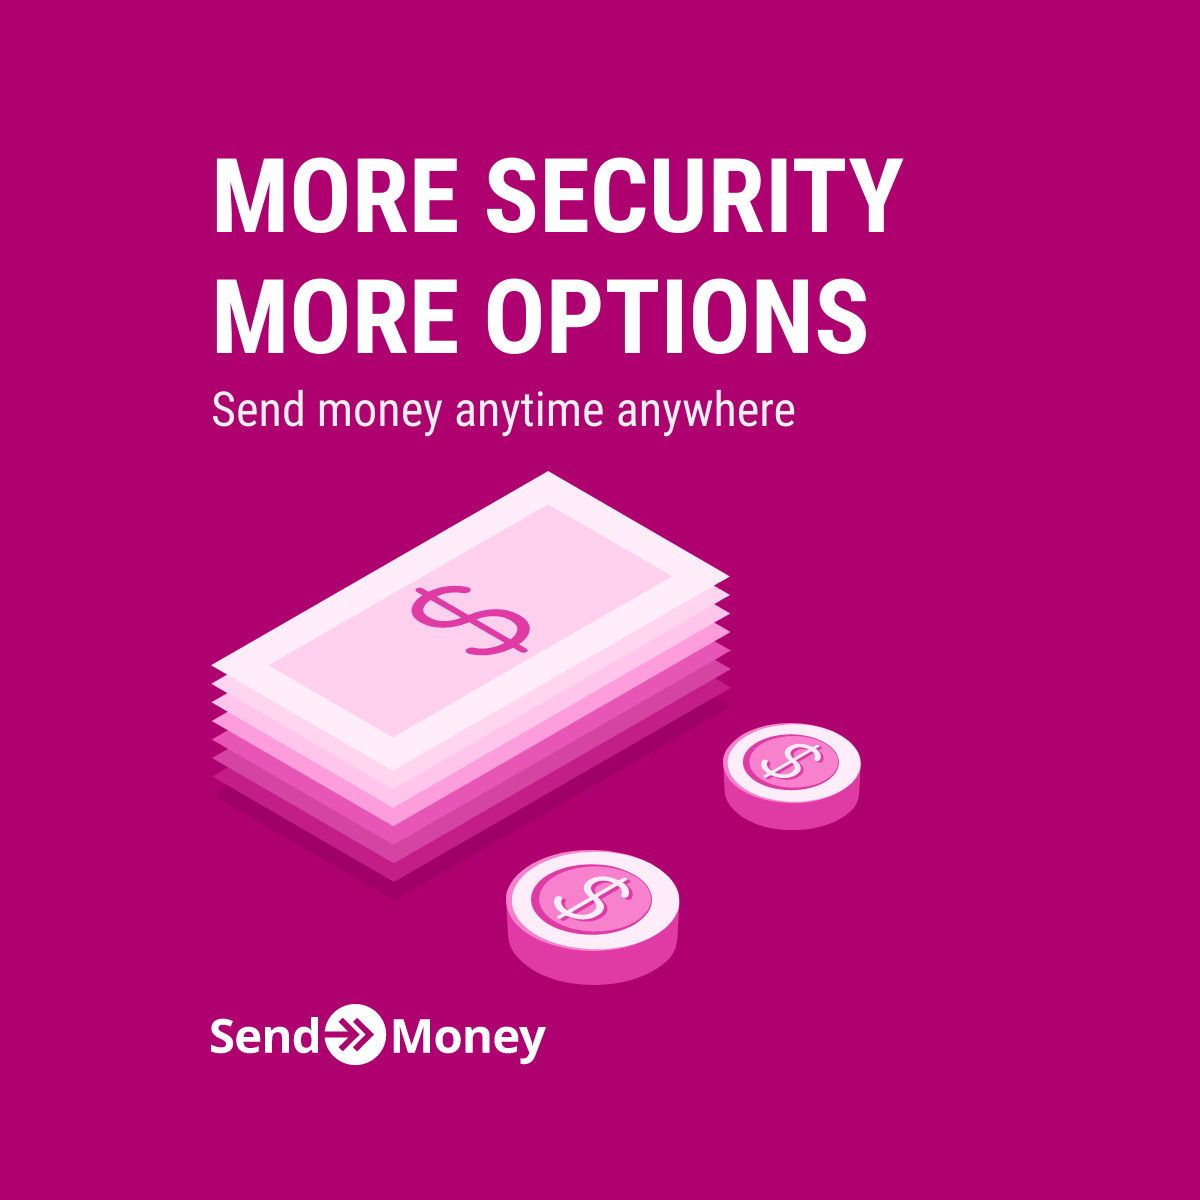 More Security and Options for Sending Money